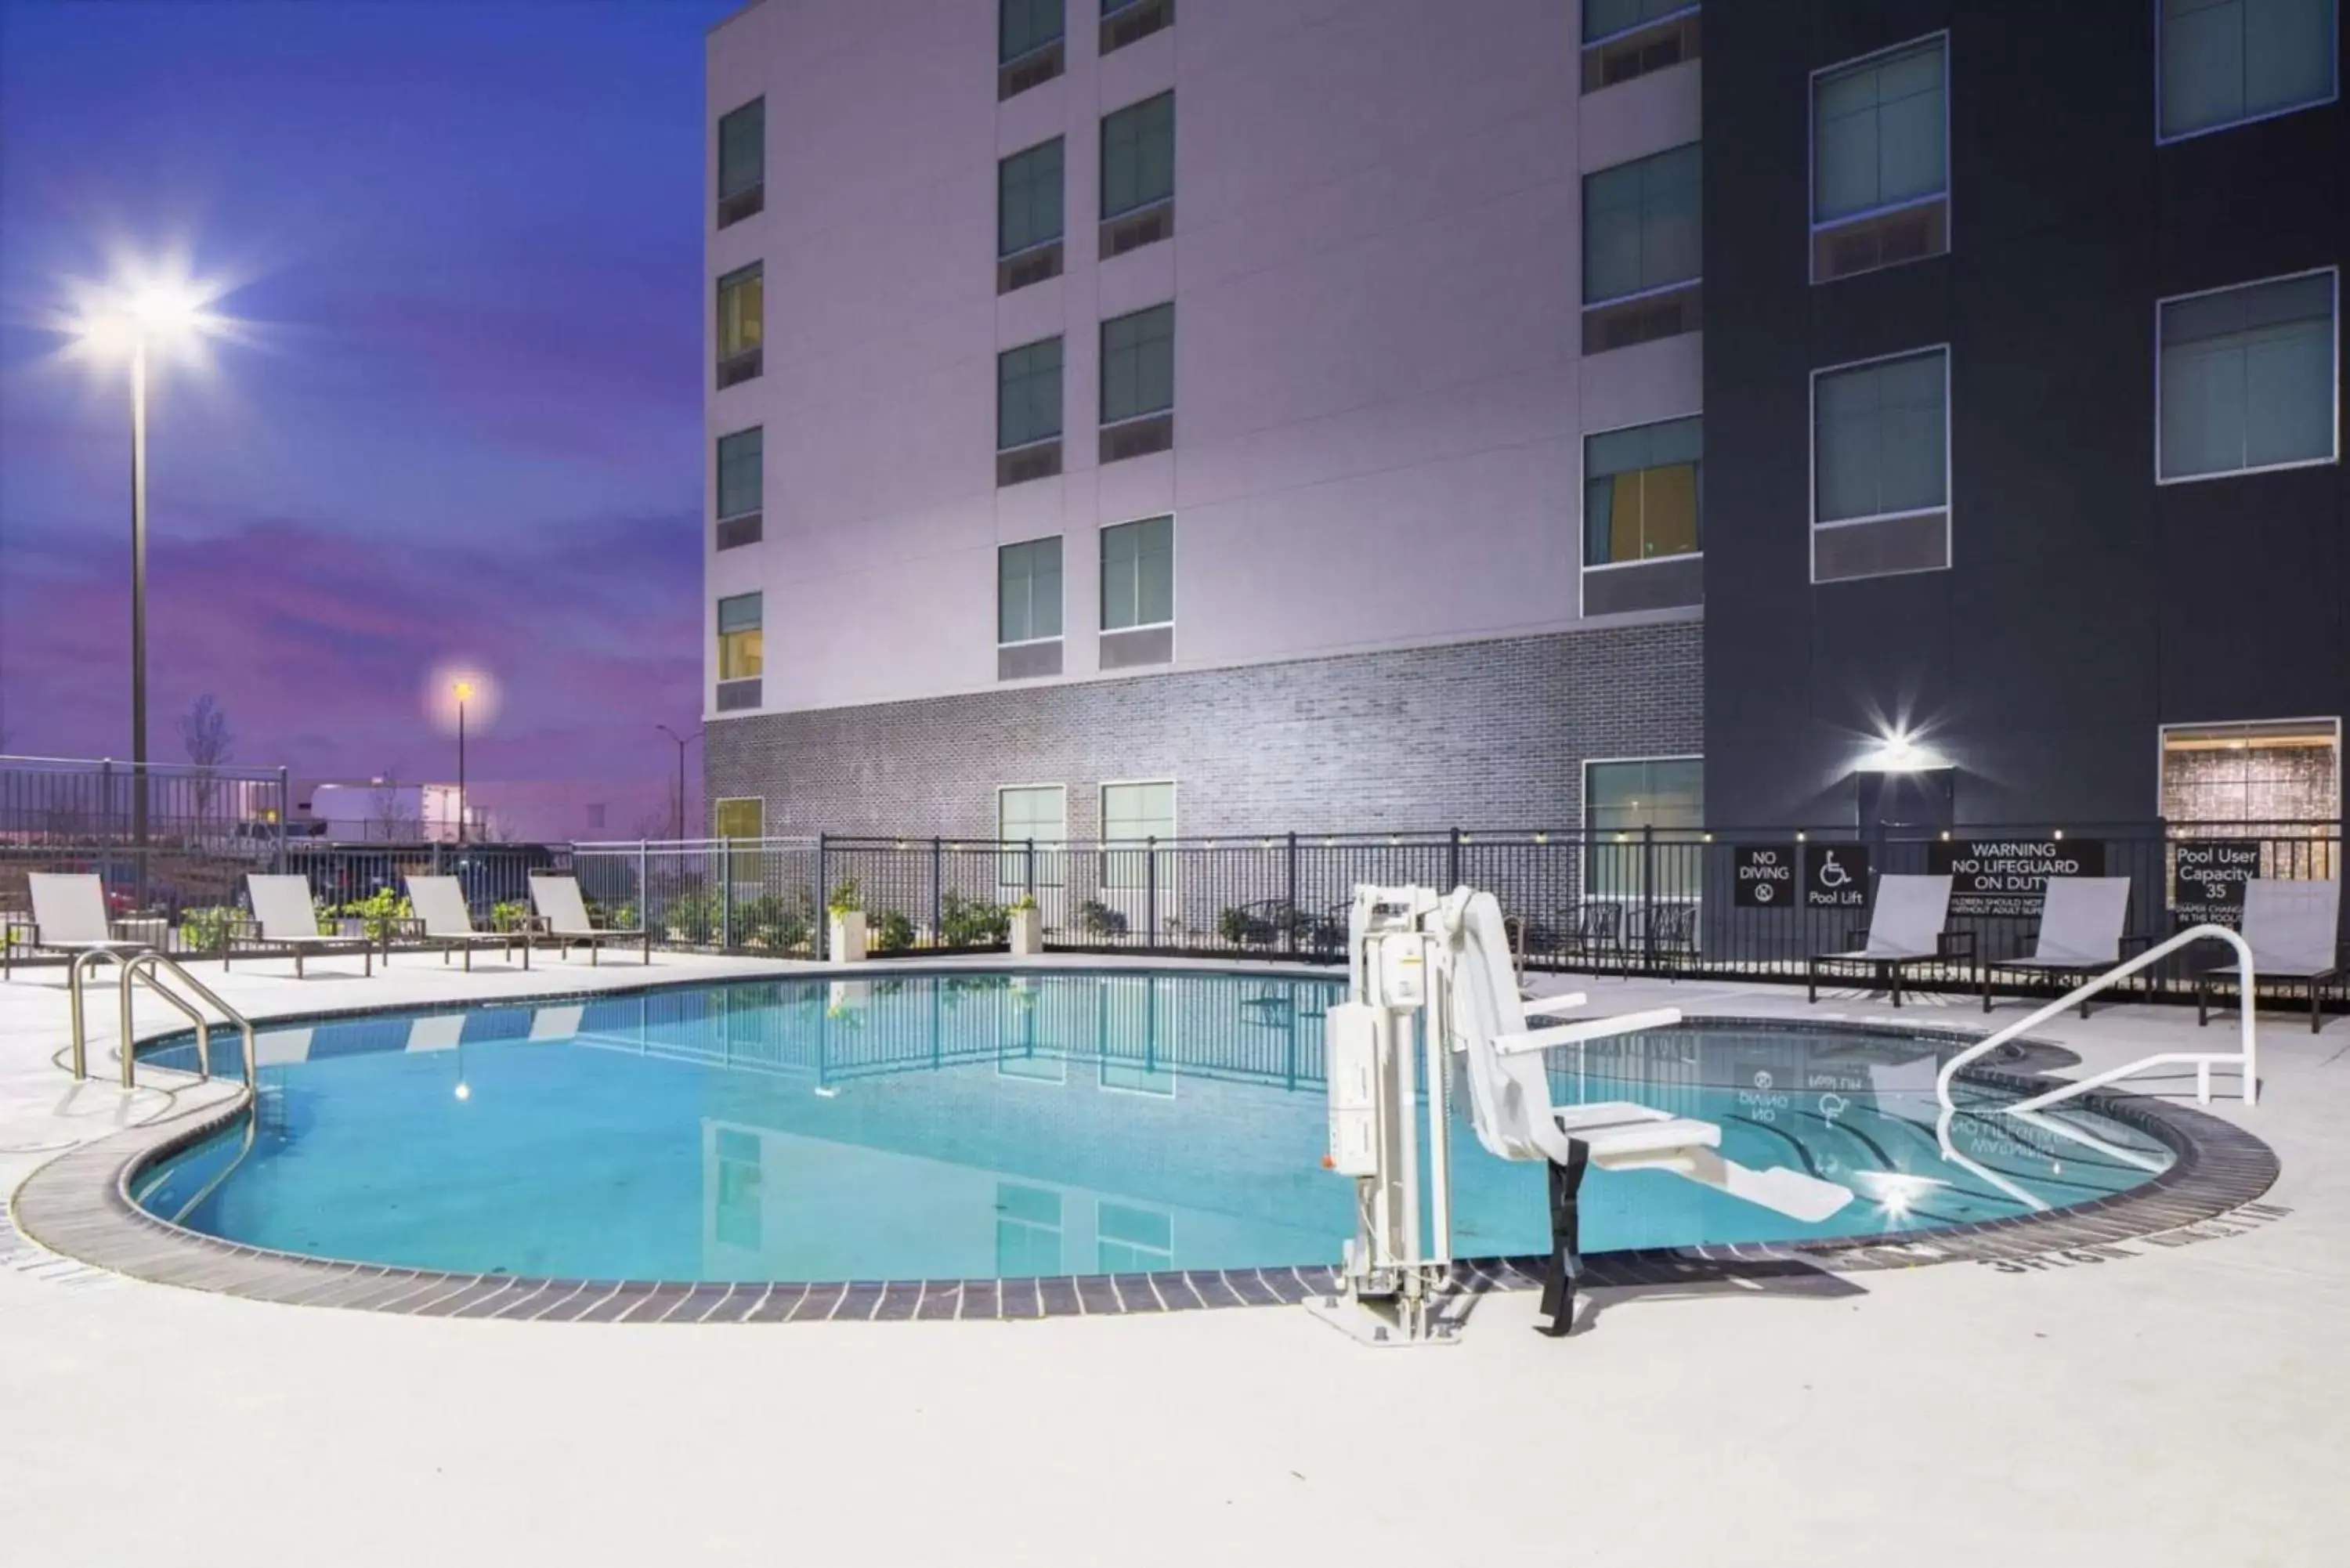 Swimming Pool in Homewood Suites by Hilton DFW Airport South, TX